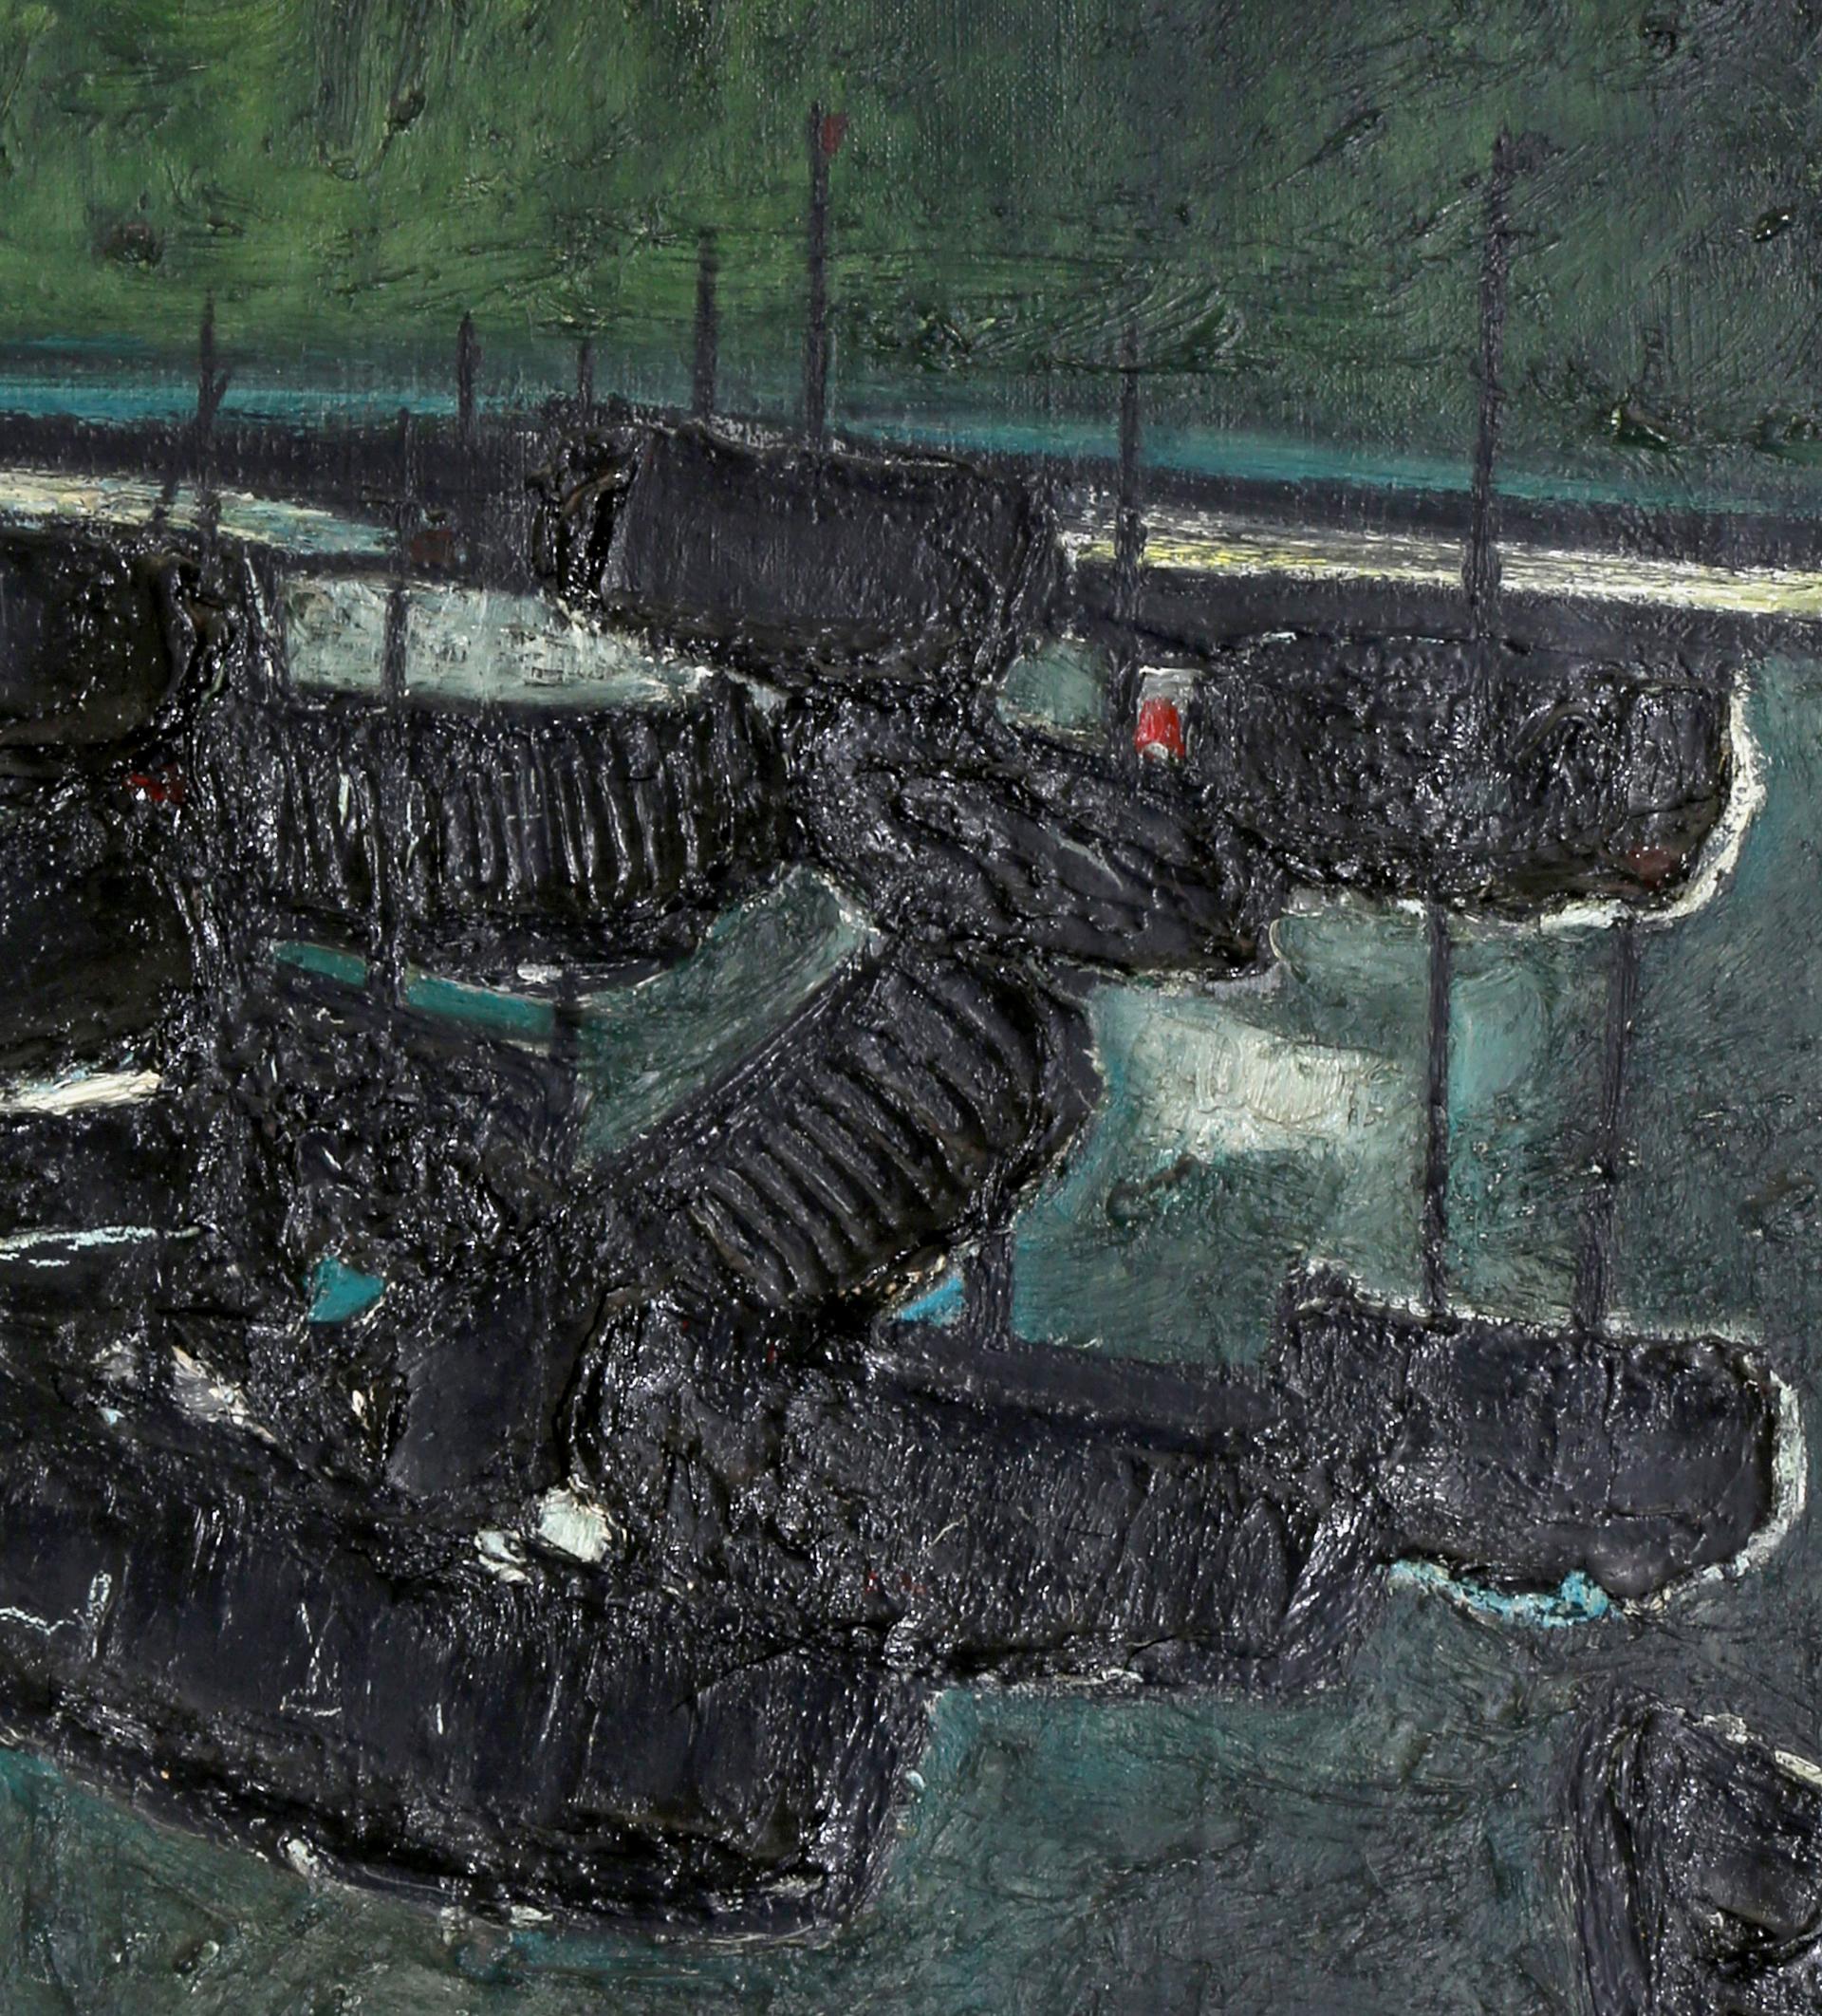 Artist: David Azuz, Israeli/French (1942 - 2014)
Title: Boats in the Harbor
Year: 1960
Medium: Oil on Canvas, signed l.l. and verso
Size: 31 x 25.5 in. (78.74 x 64.77 cm)
Frame Size: 33.5 x 26 inches